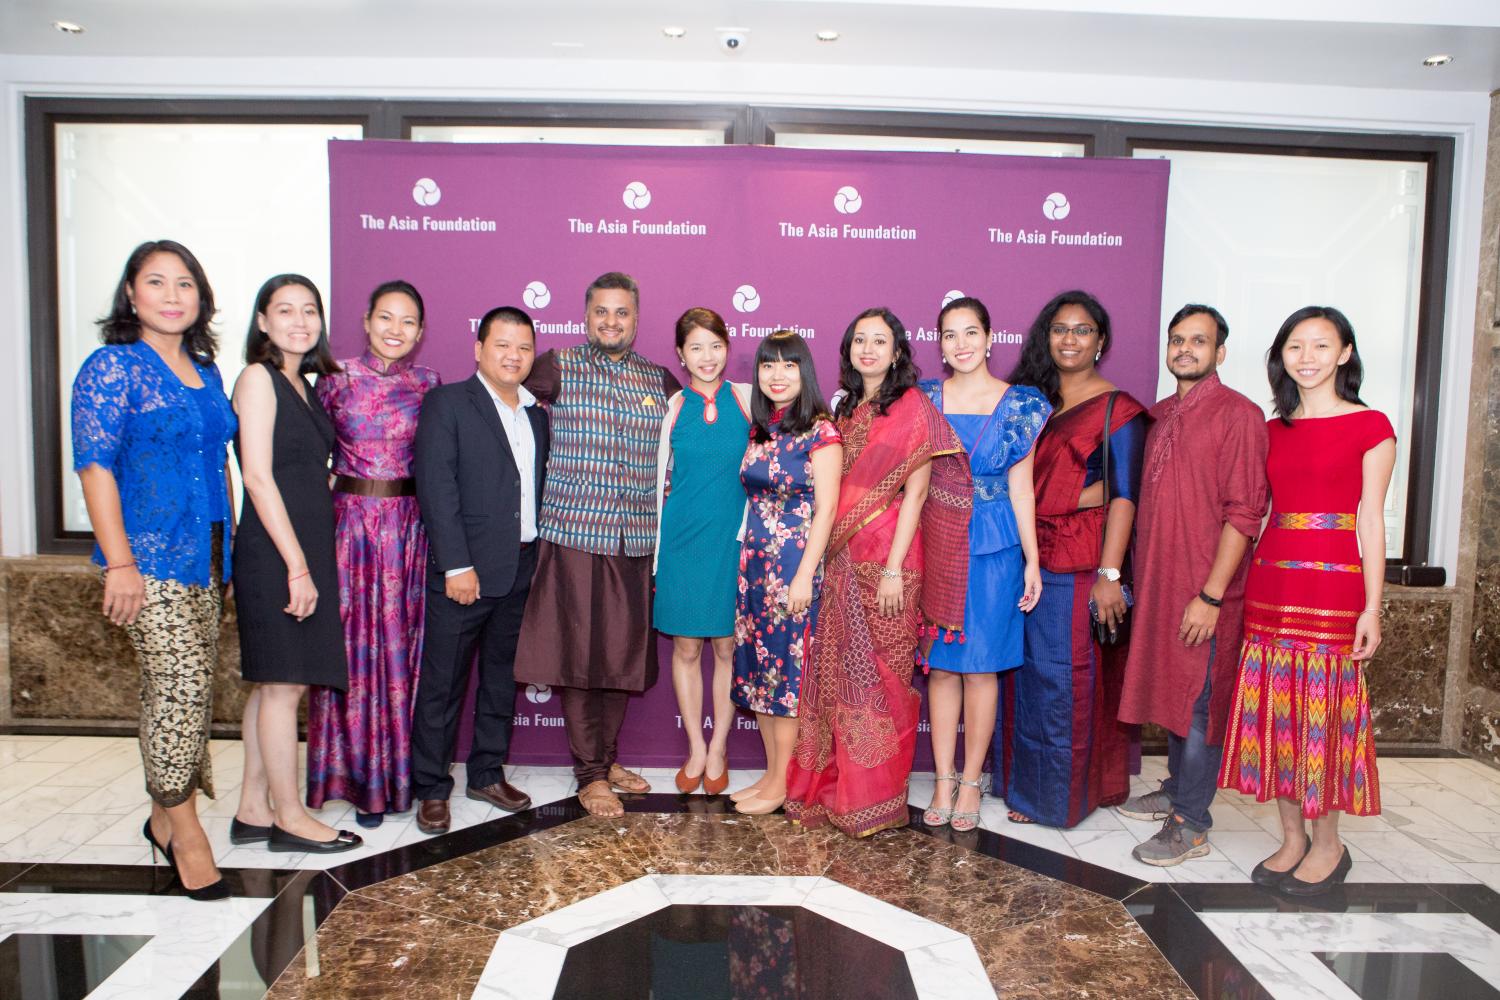 The 2018 Asia Foundation Development Fellows gather for photo in front of step and repeat banner